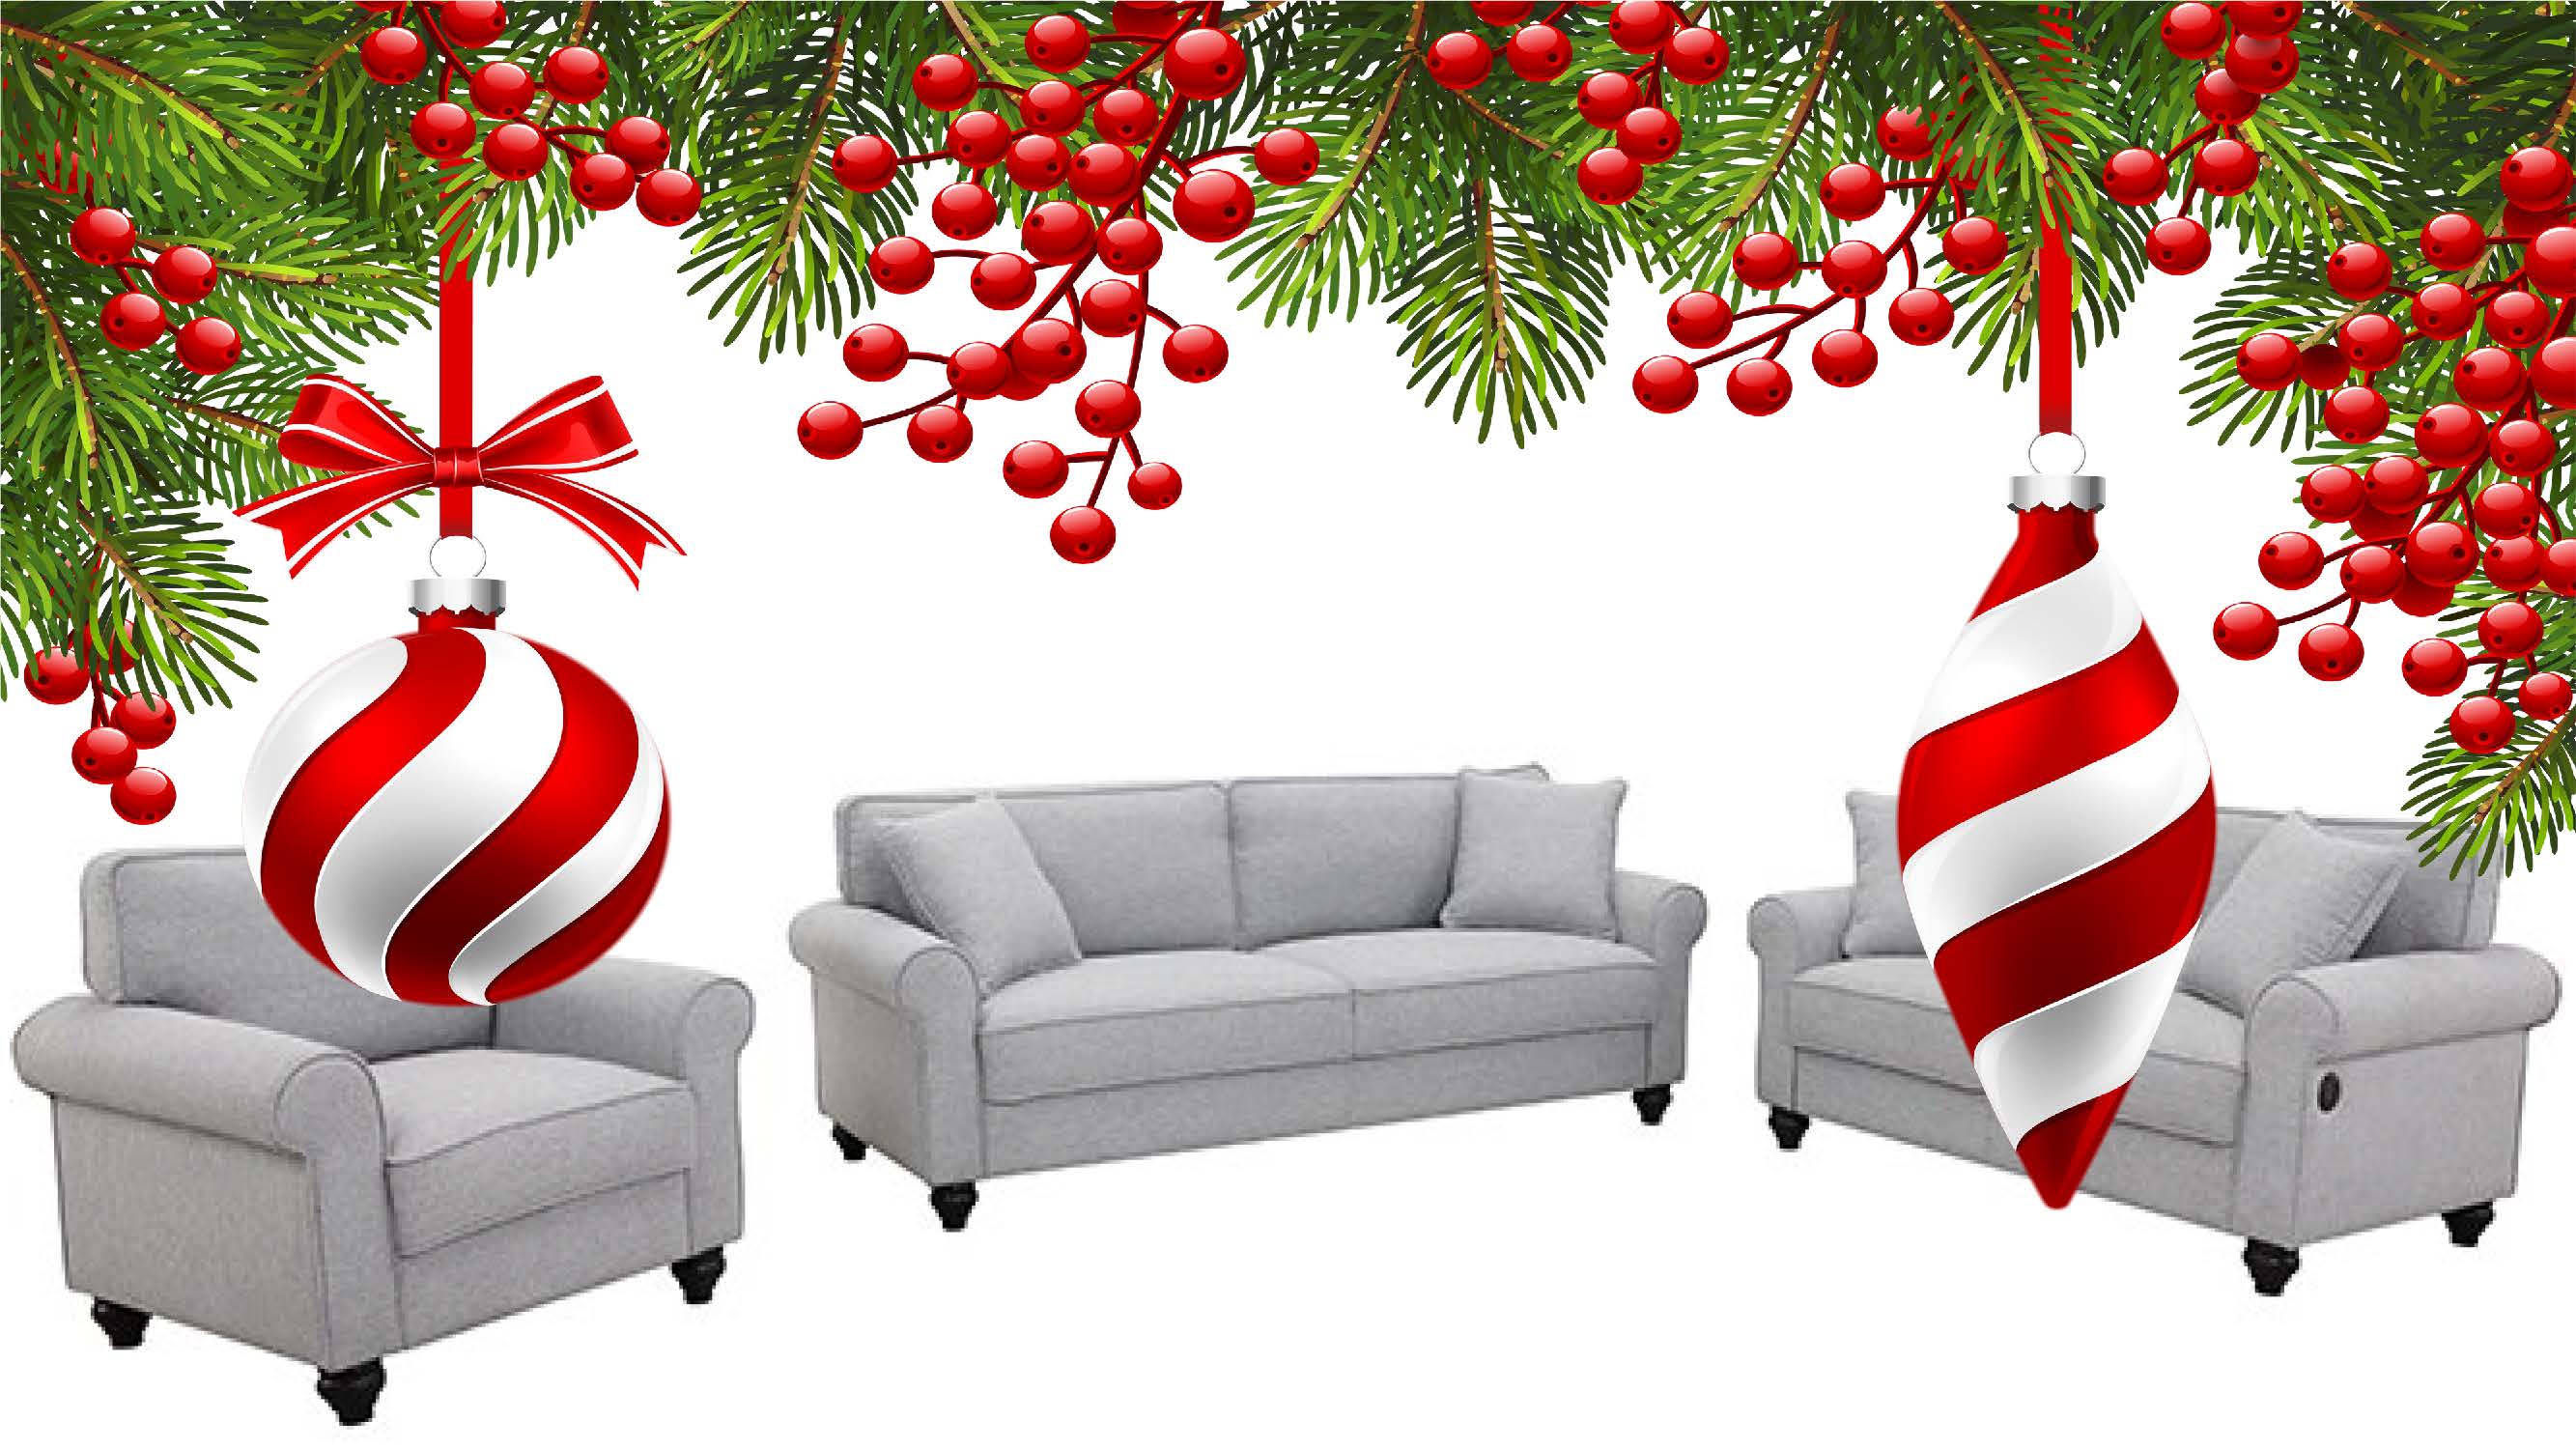 Experience the Magic of Christmas with Kairui's Luxurious Indoor Furniture Collection